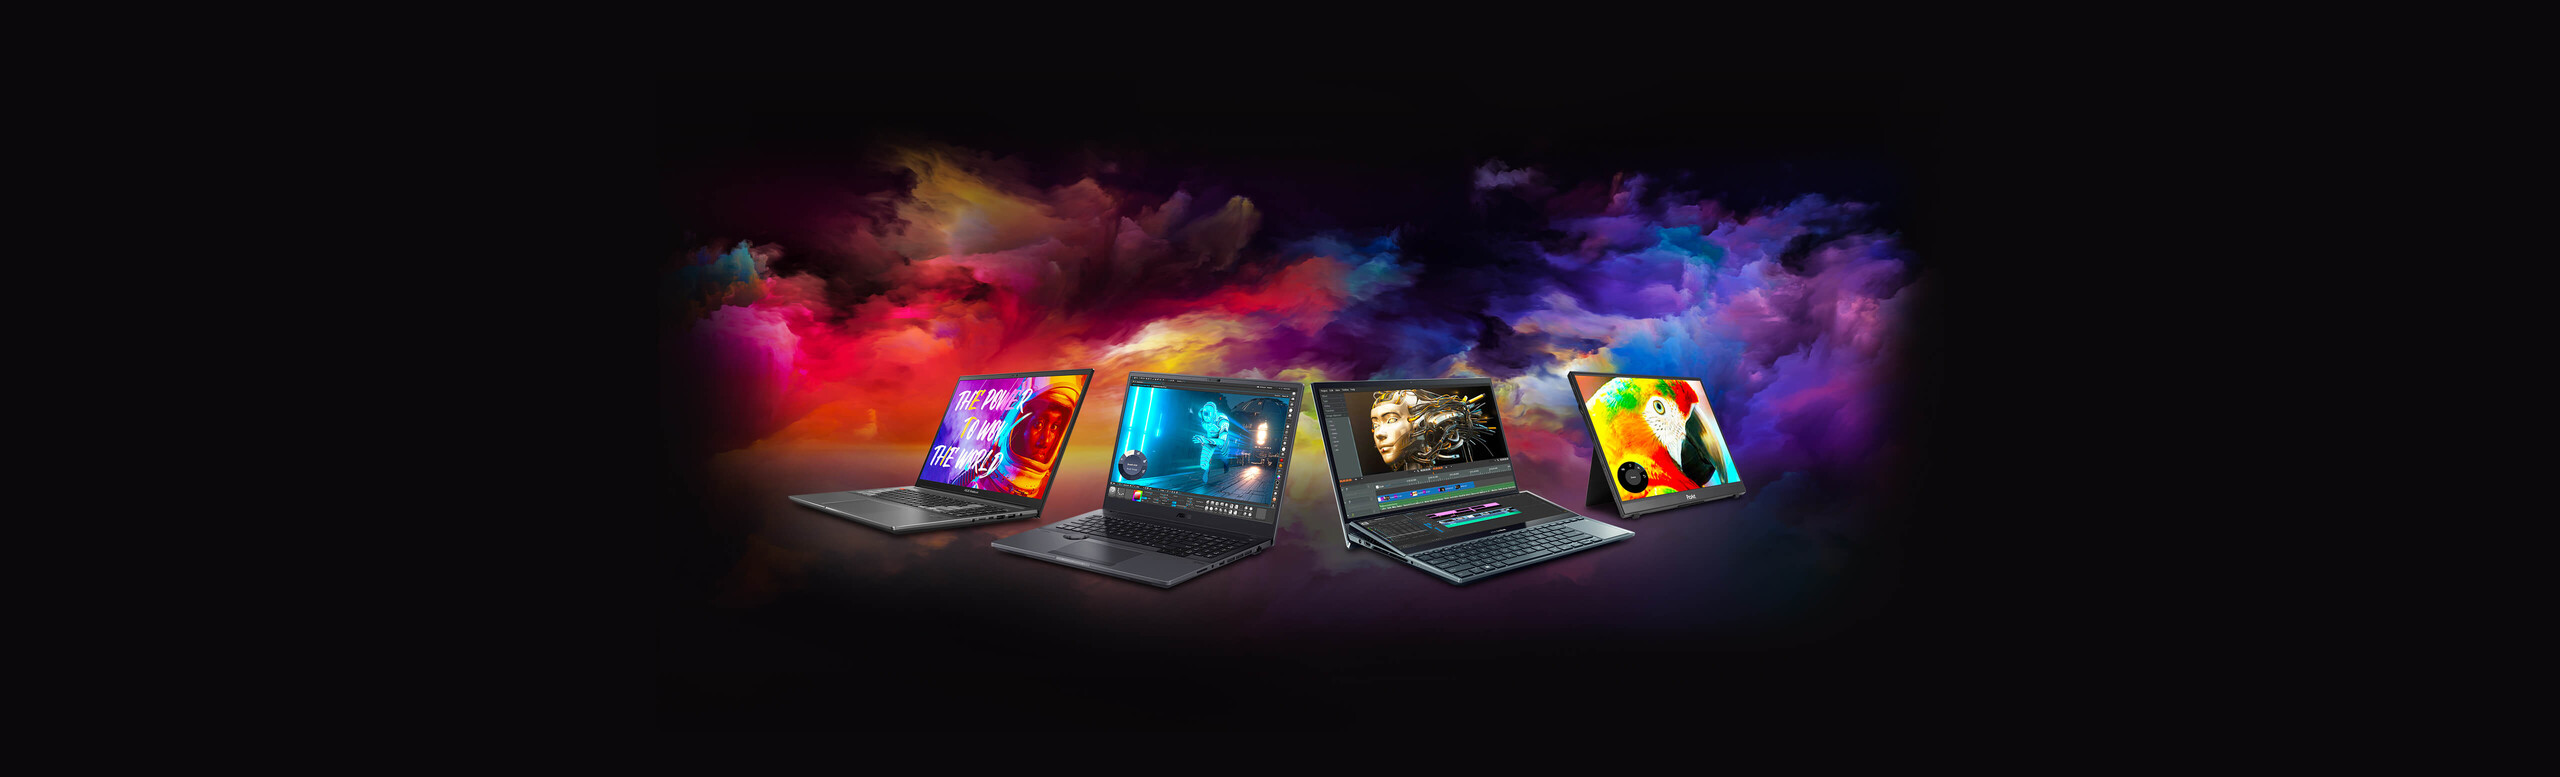 Four ASUS laptops placed in different angle with colorful image on the screens.